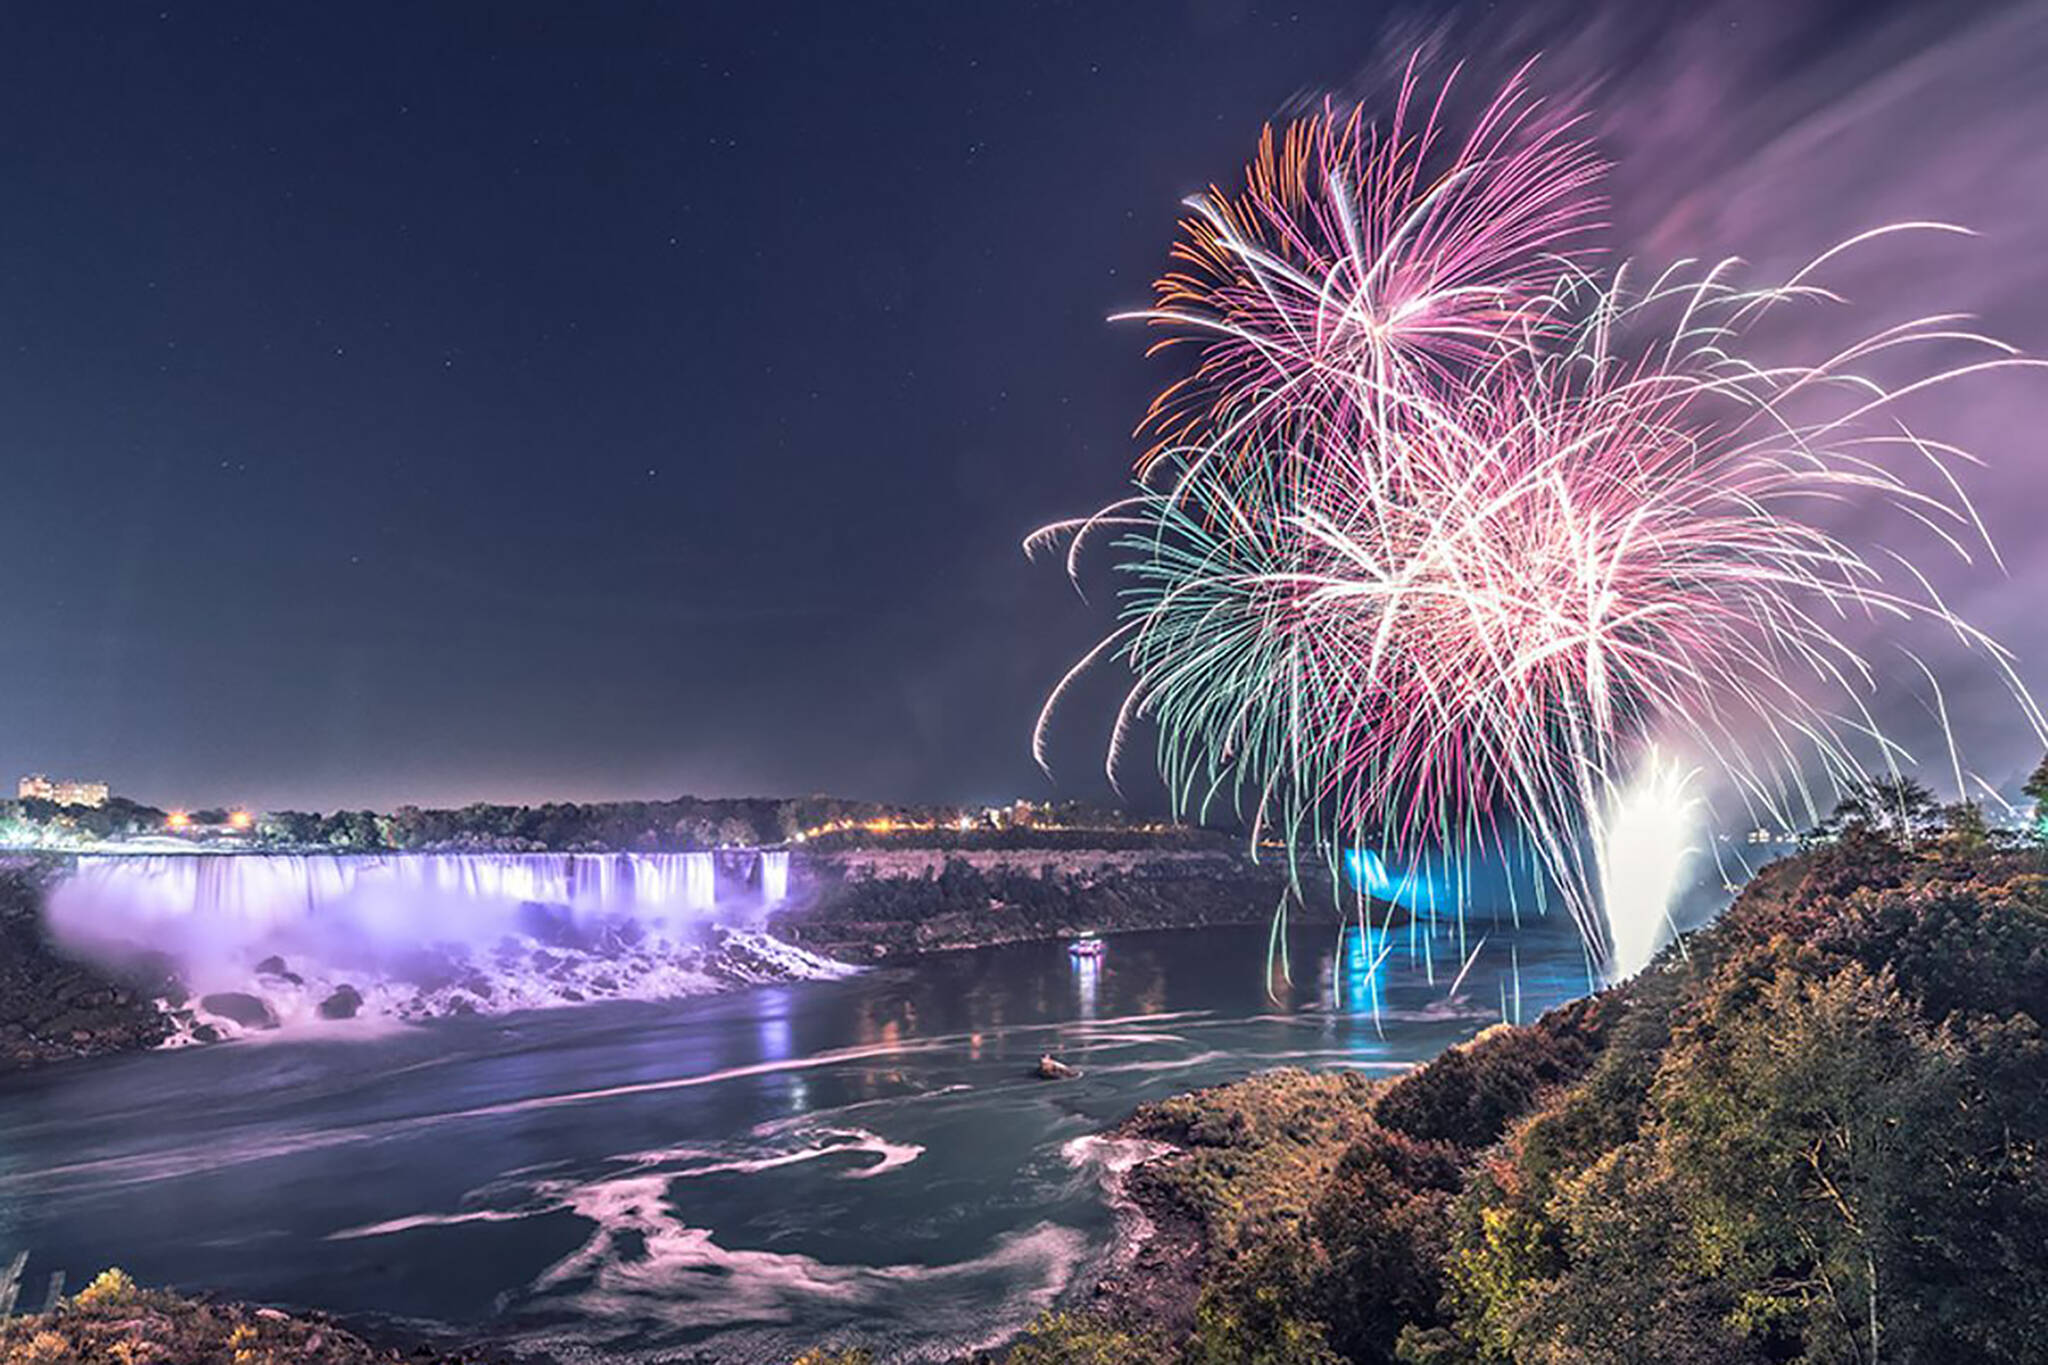 You can cruise under nightly fireworks this summer in Ontario